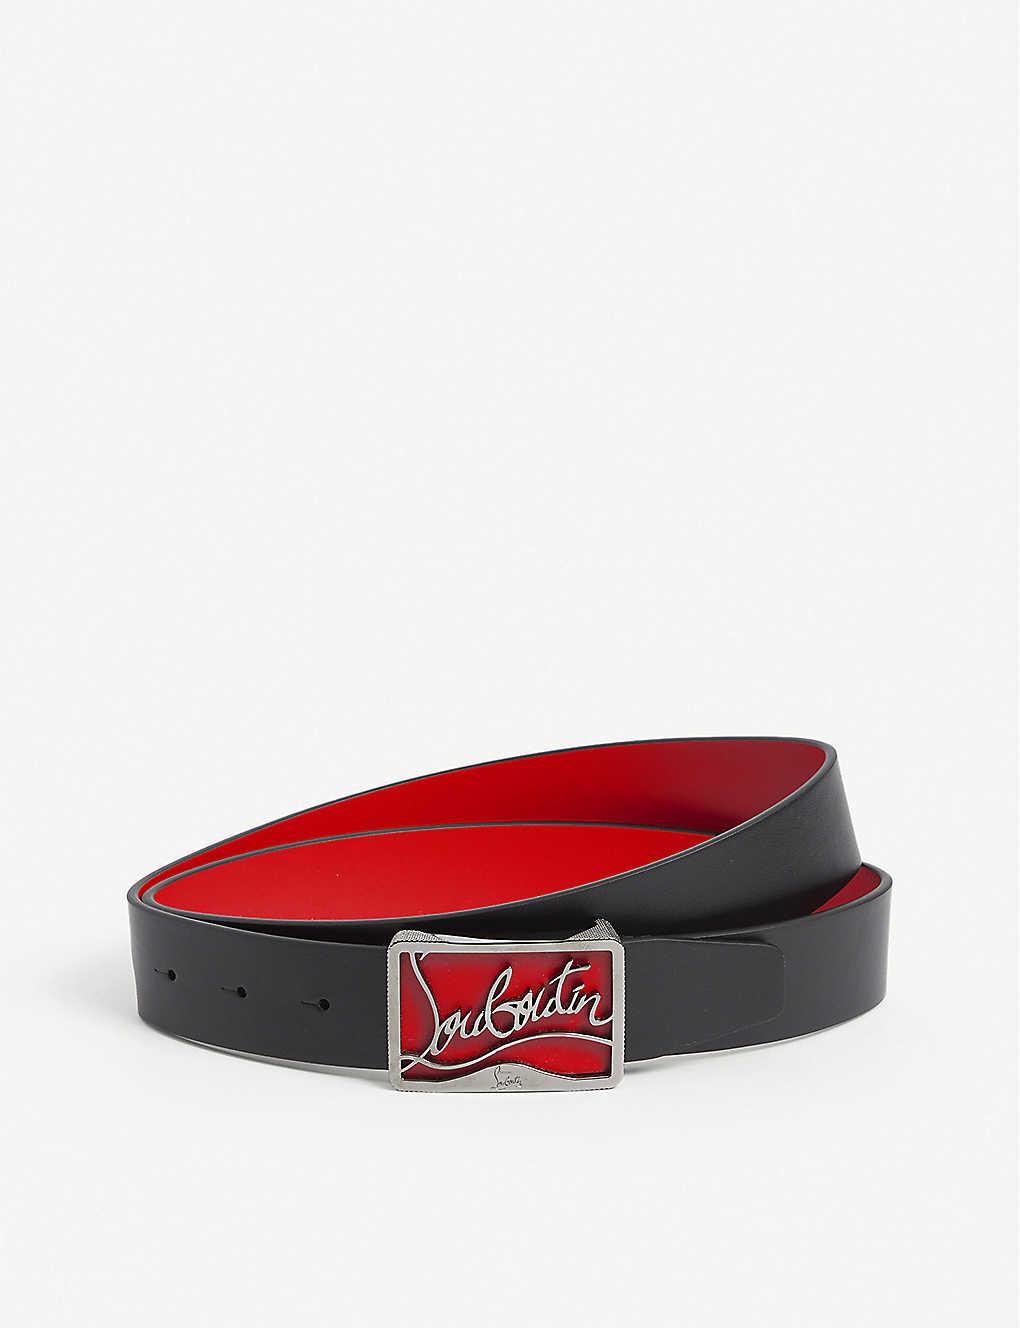 Christian Louboutin Ricky Logo-buckle Leather Belt in Black/Red 